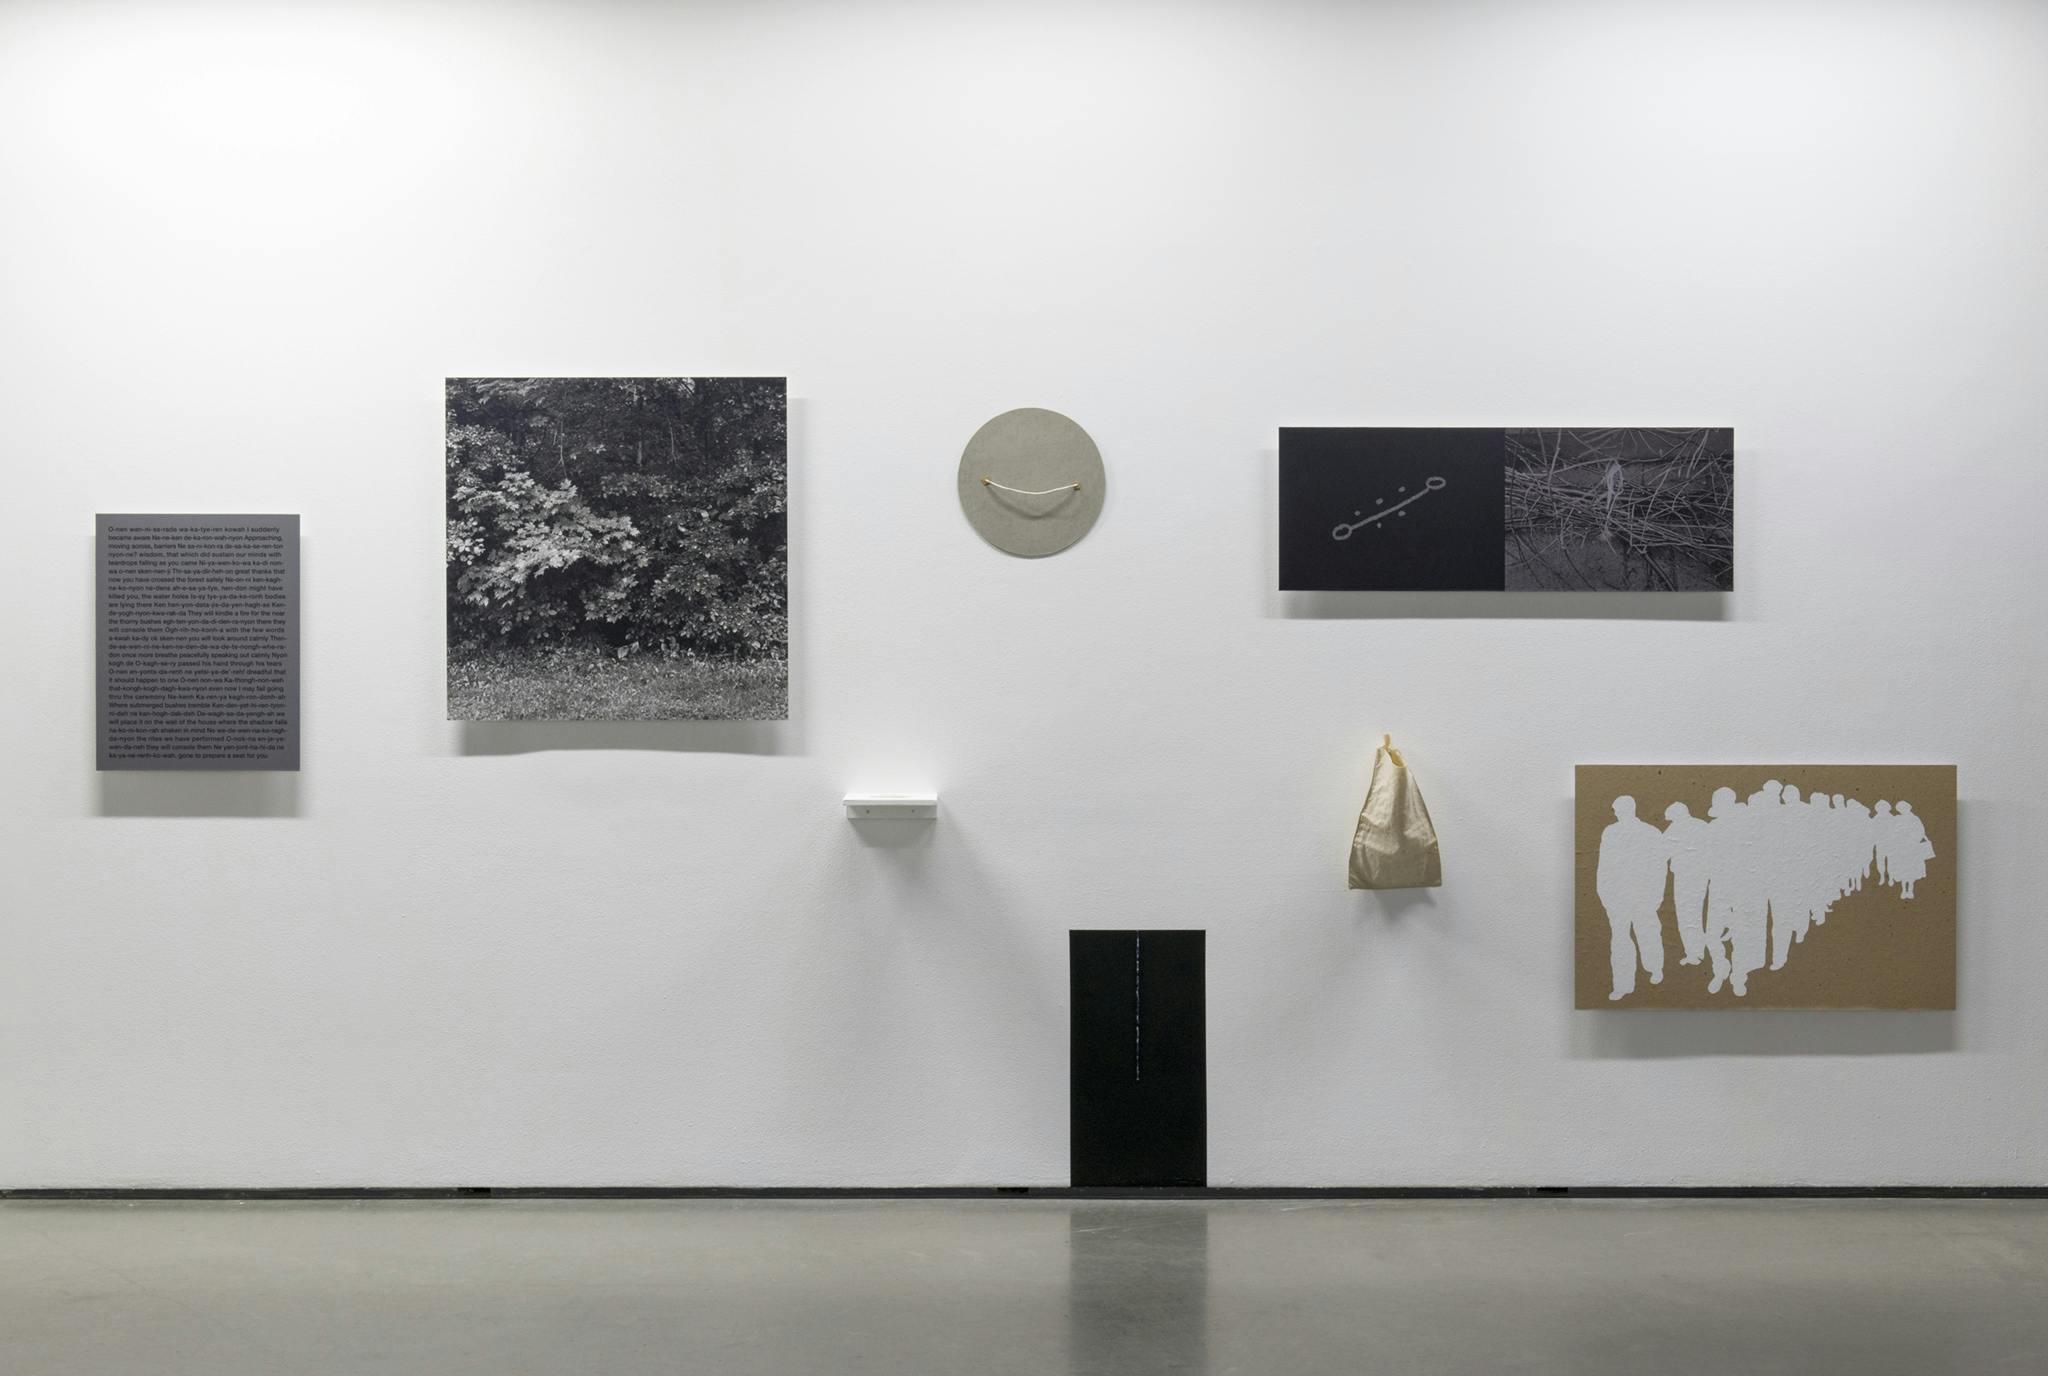 Installation image of various works in a gallery. Coloured photographs of various landscapes, texts, and some objects are sparsely placed on the wall.